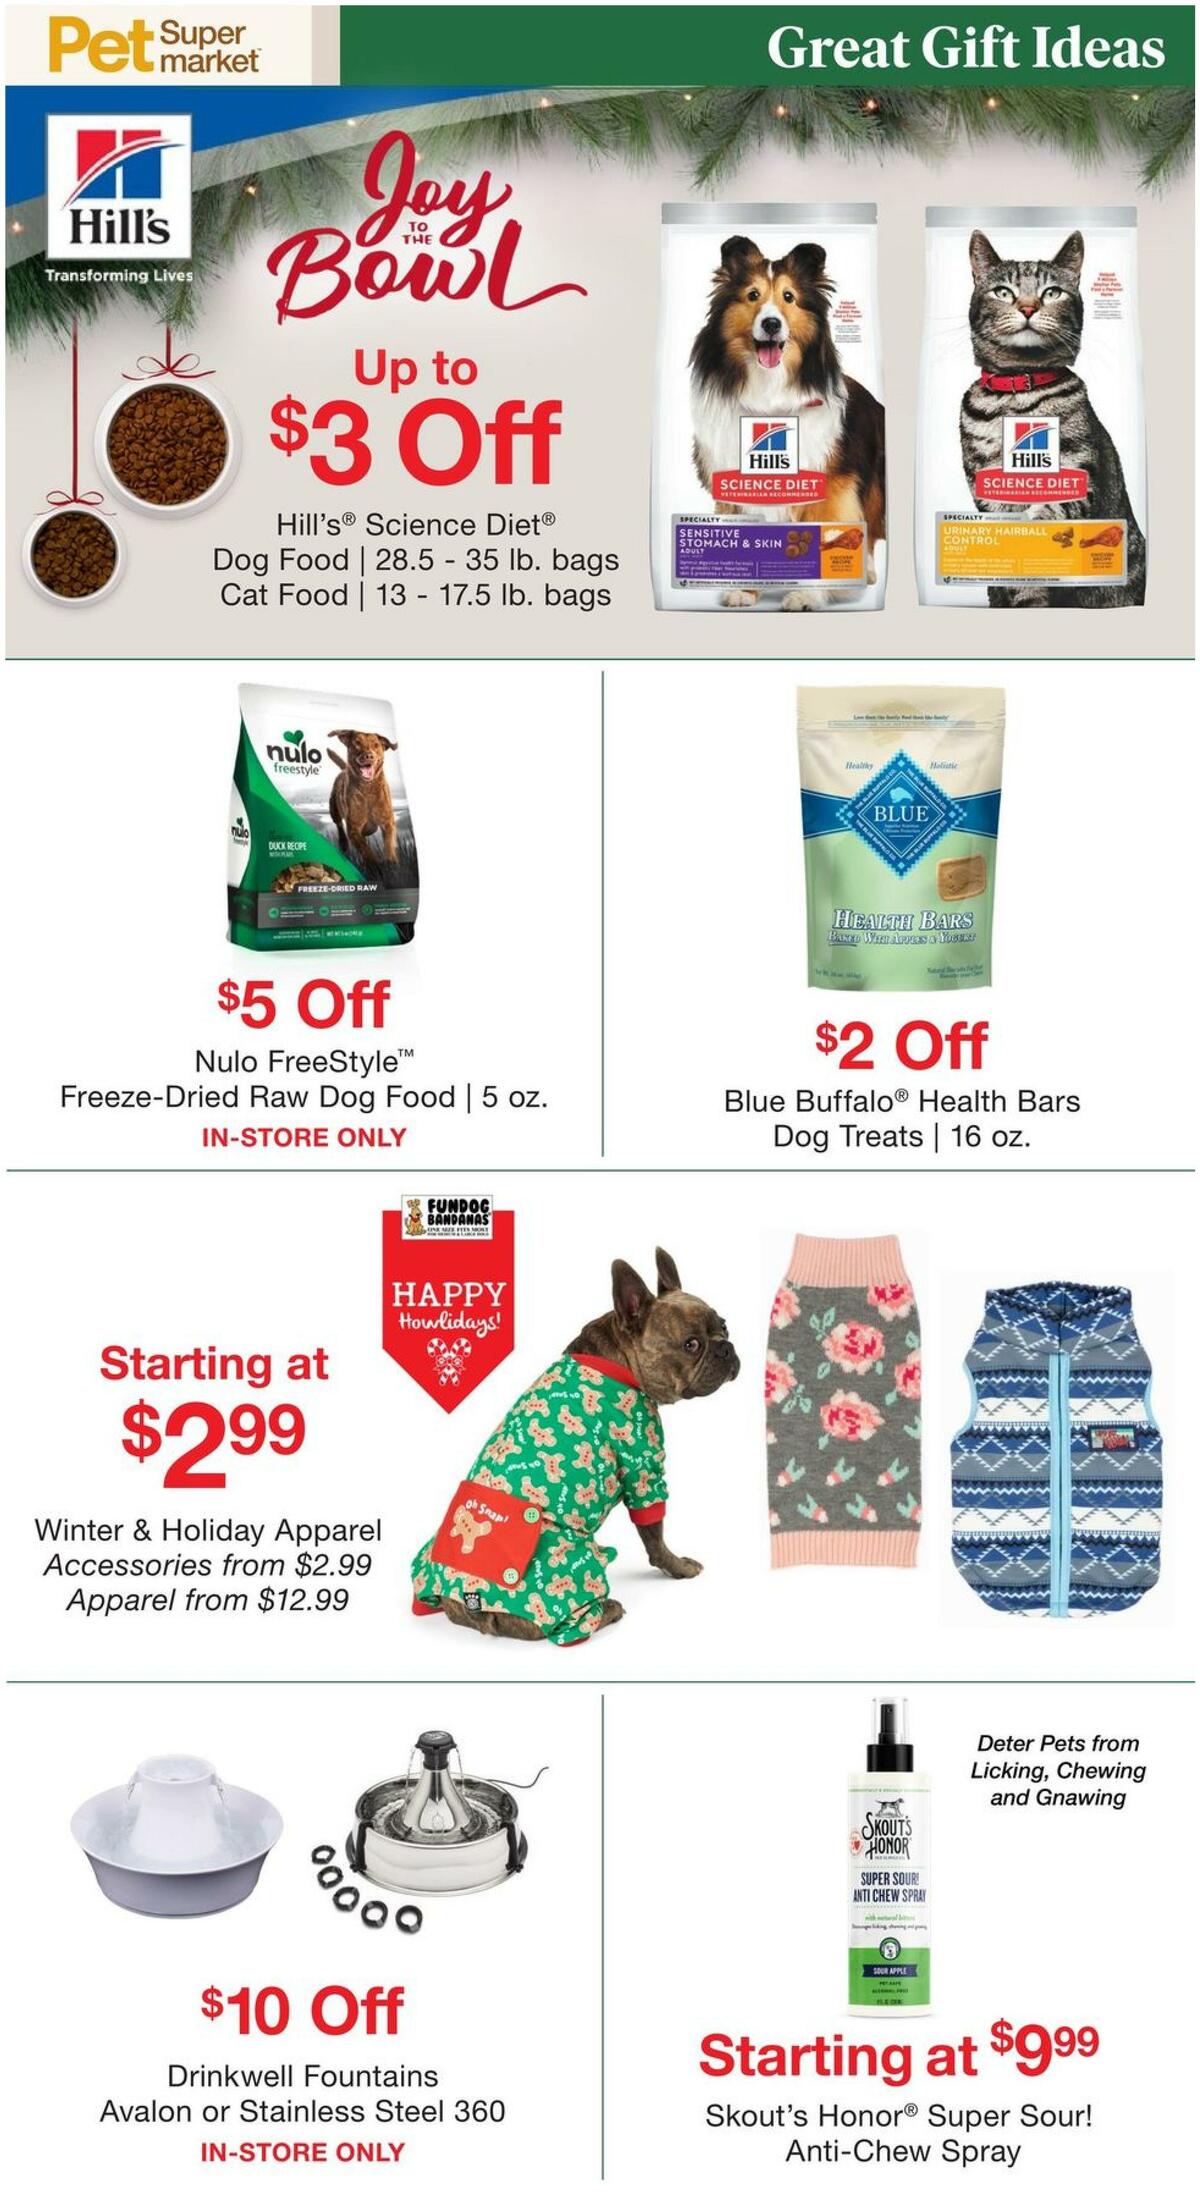 Pet Supermarket Weekly Ad from December 20